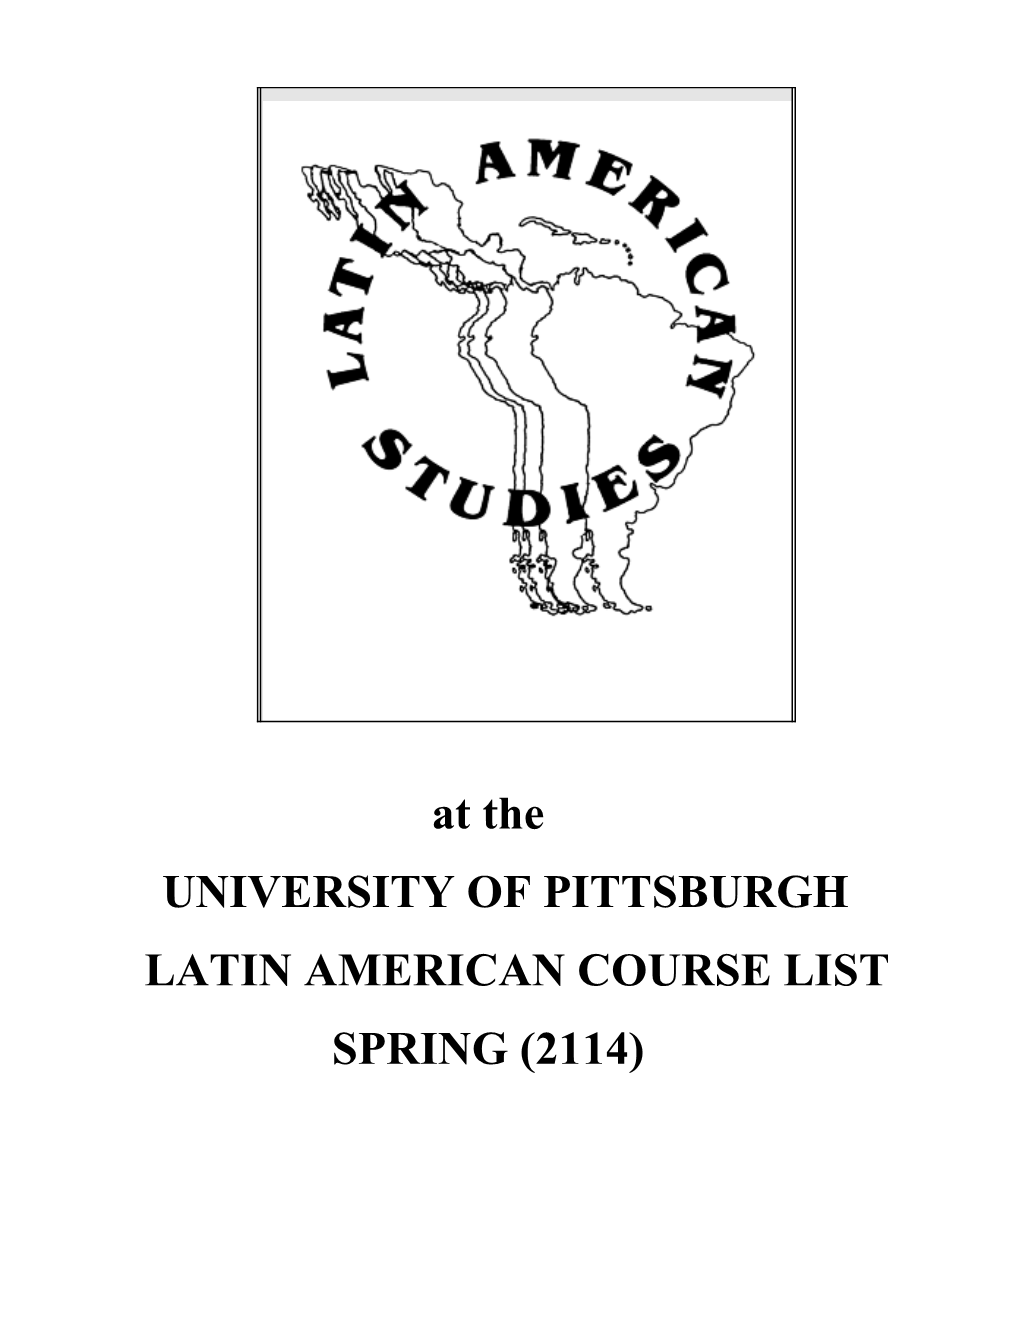 At the UNIVERSITY of PITTSBURGH LATIN AMERICAN COURSE LIST SPRING (2114)